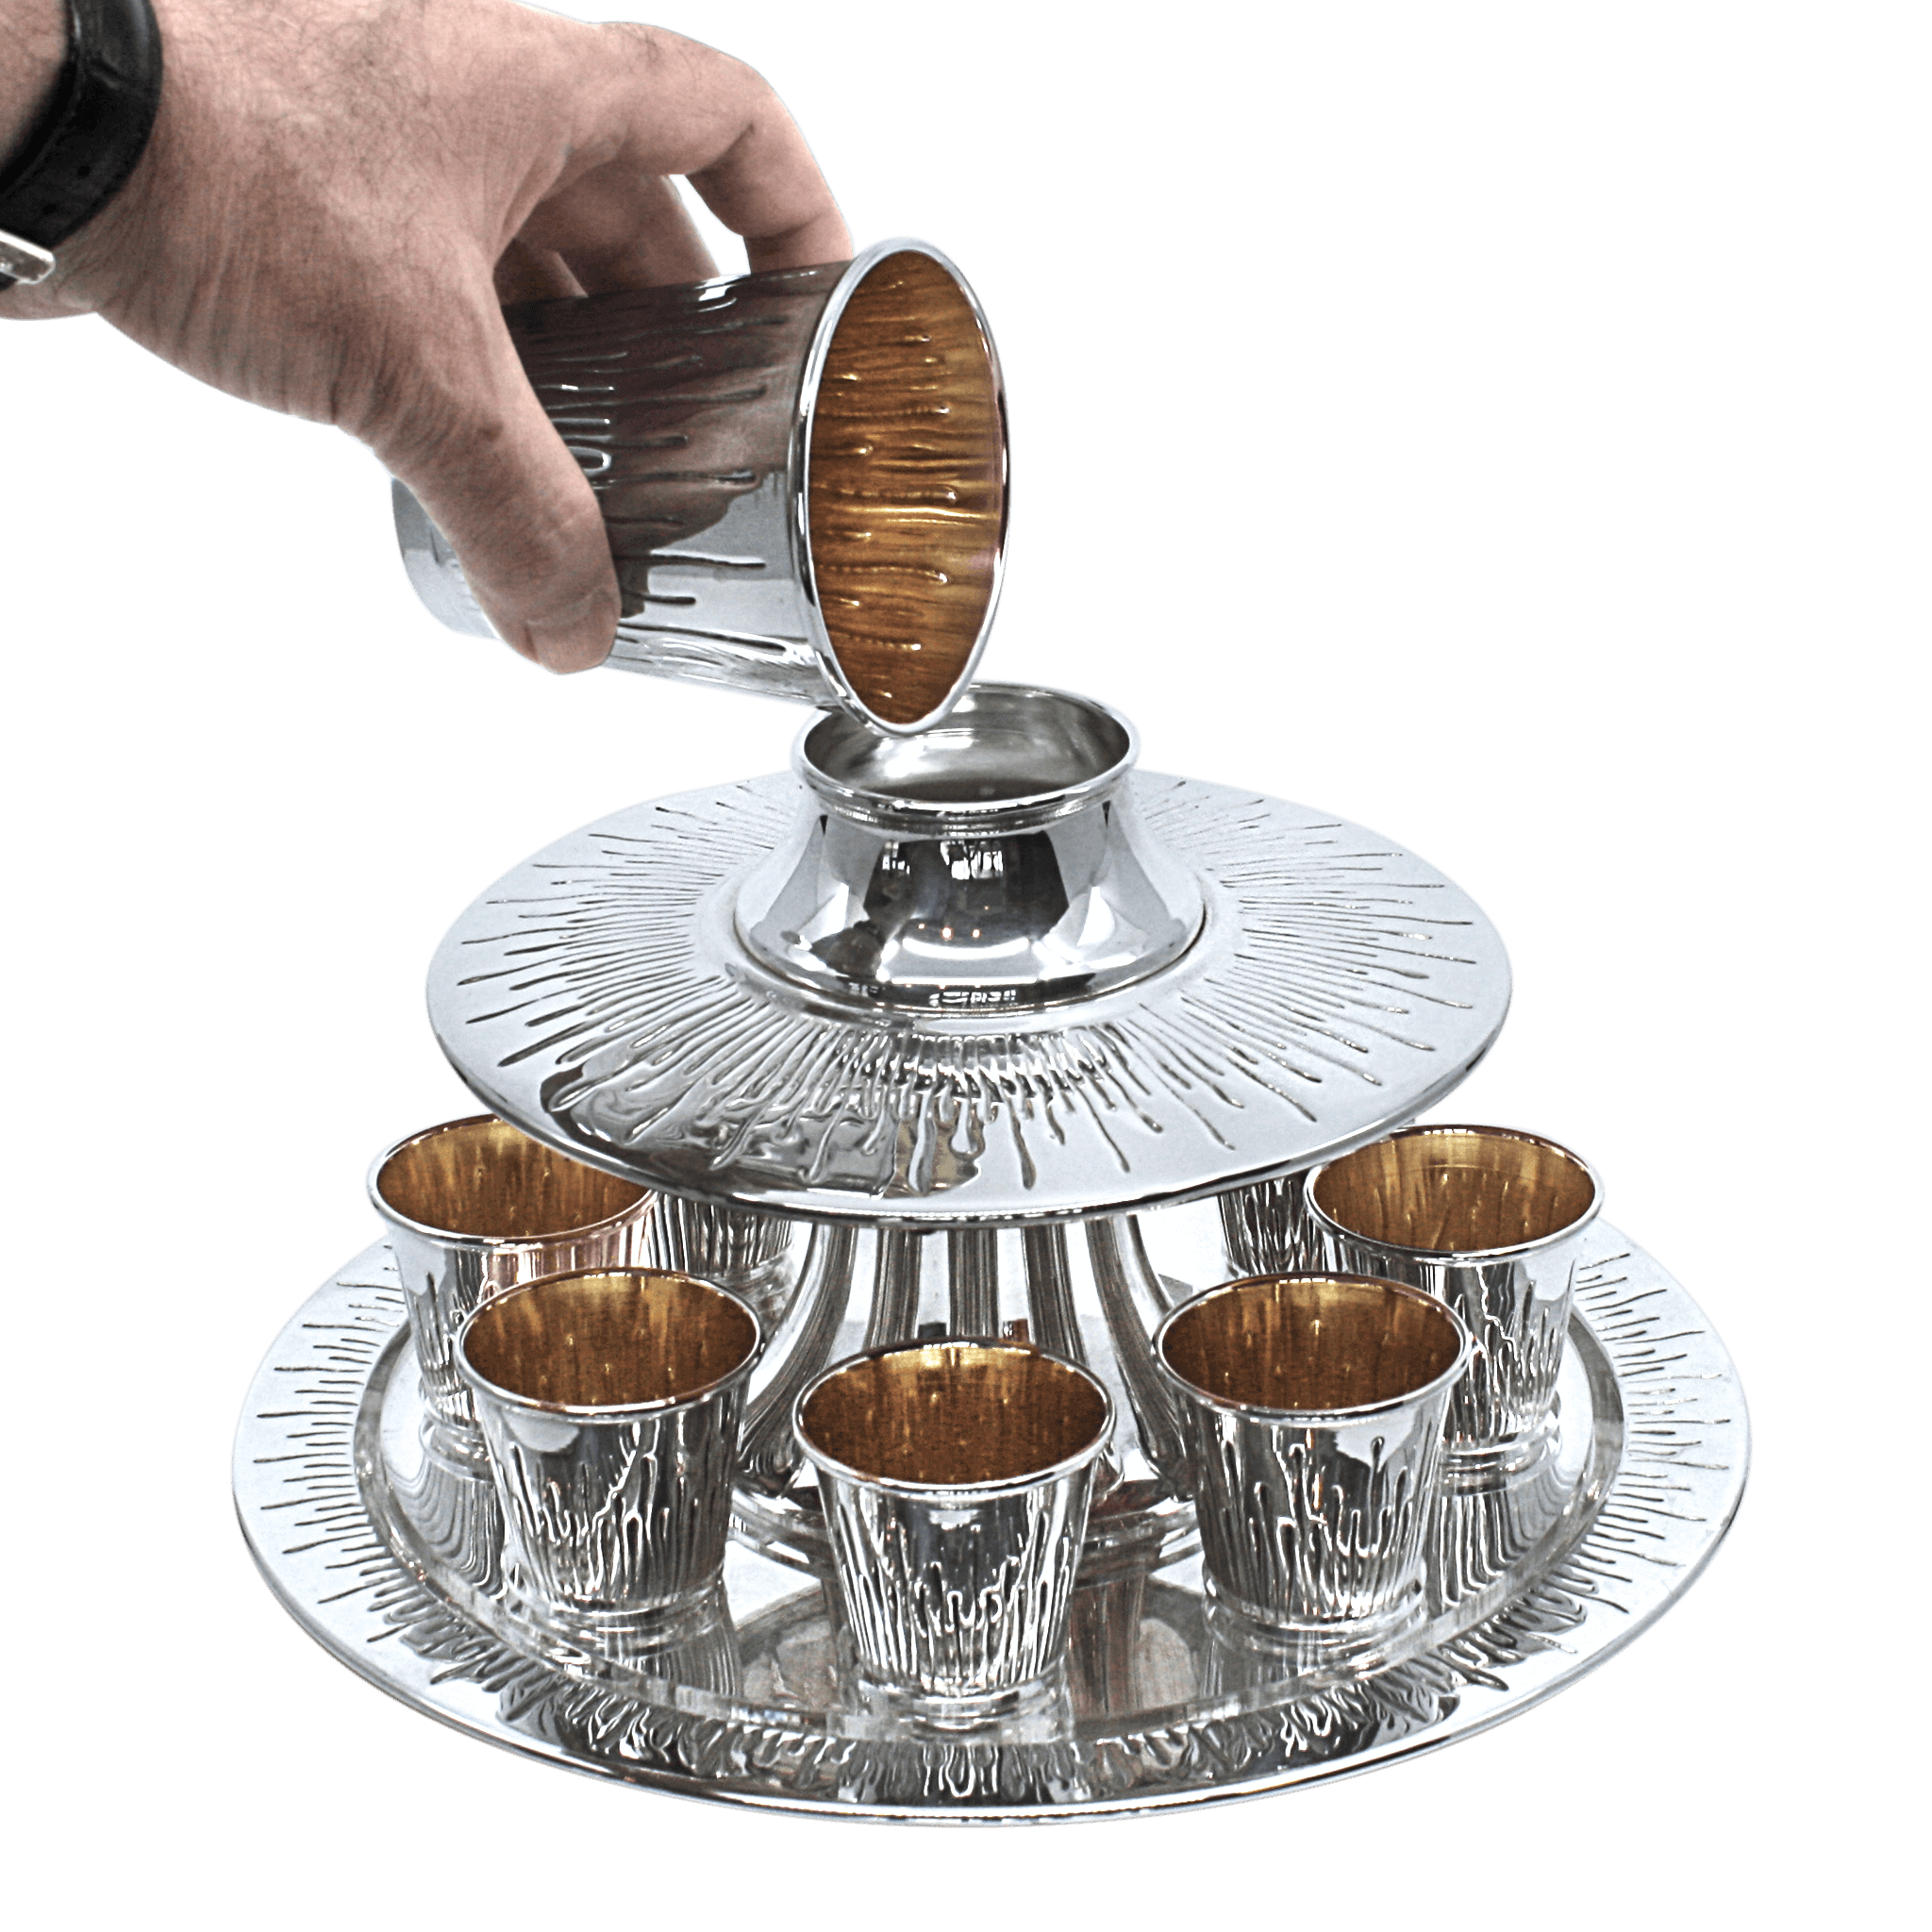 Functional and Elegant: Why You Should Use A Kiddush Wine Fountain | Piece Silver Crafting By Zion Hadad